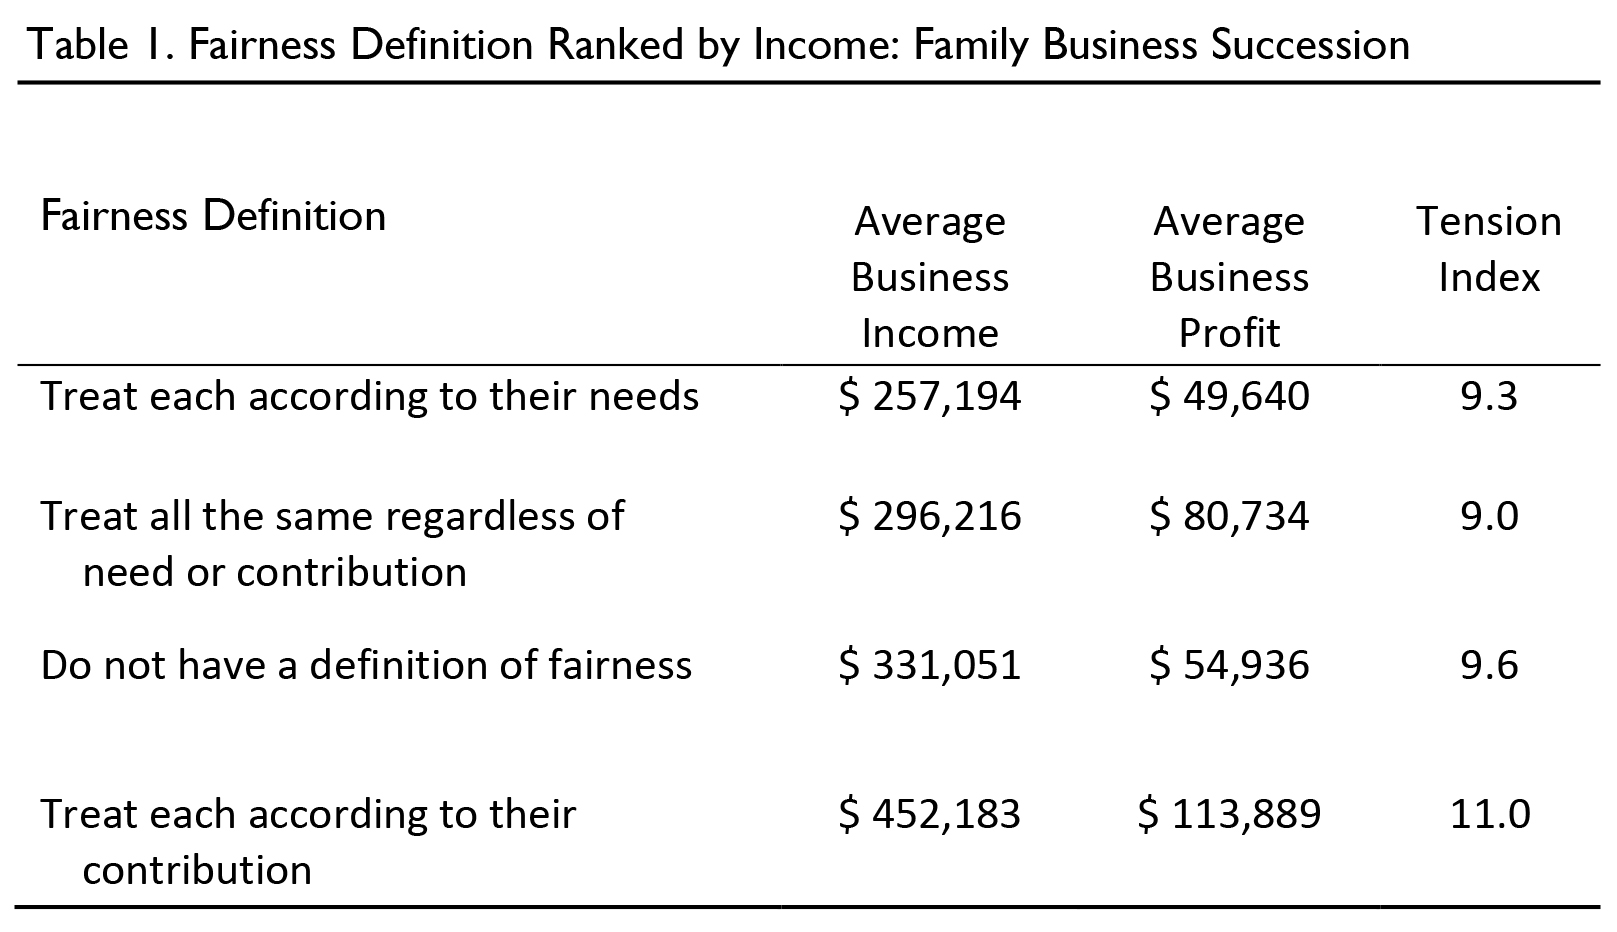 Table 1. Fairness Definition Ranked by Income: Family Business Succession